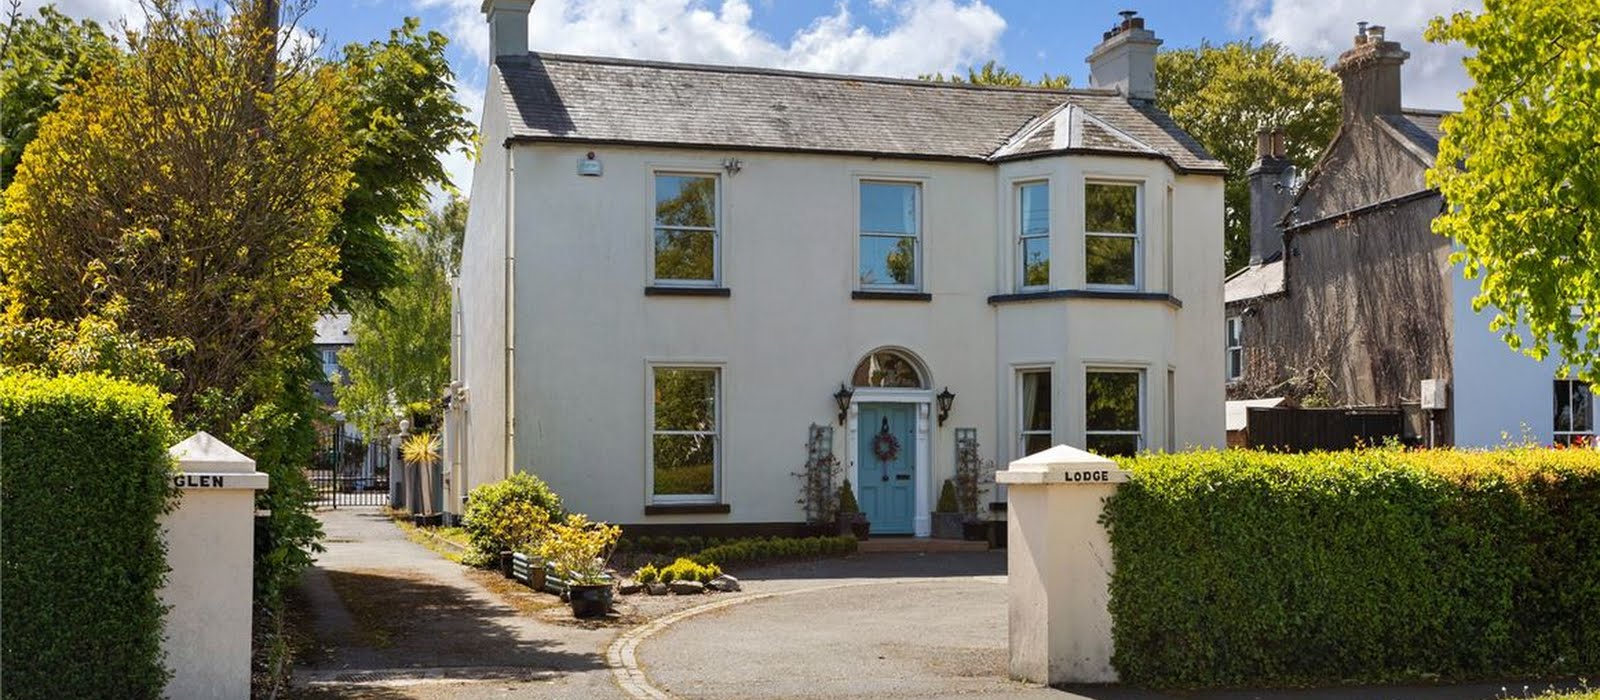 This gorgeous Greystone home is on the market for €1.15 million